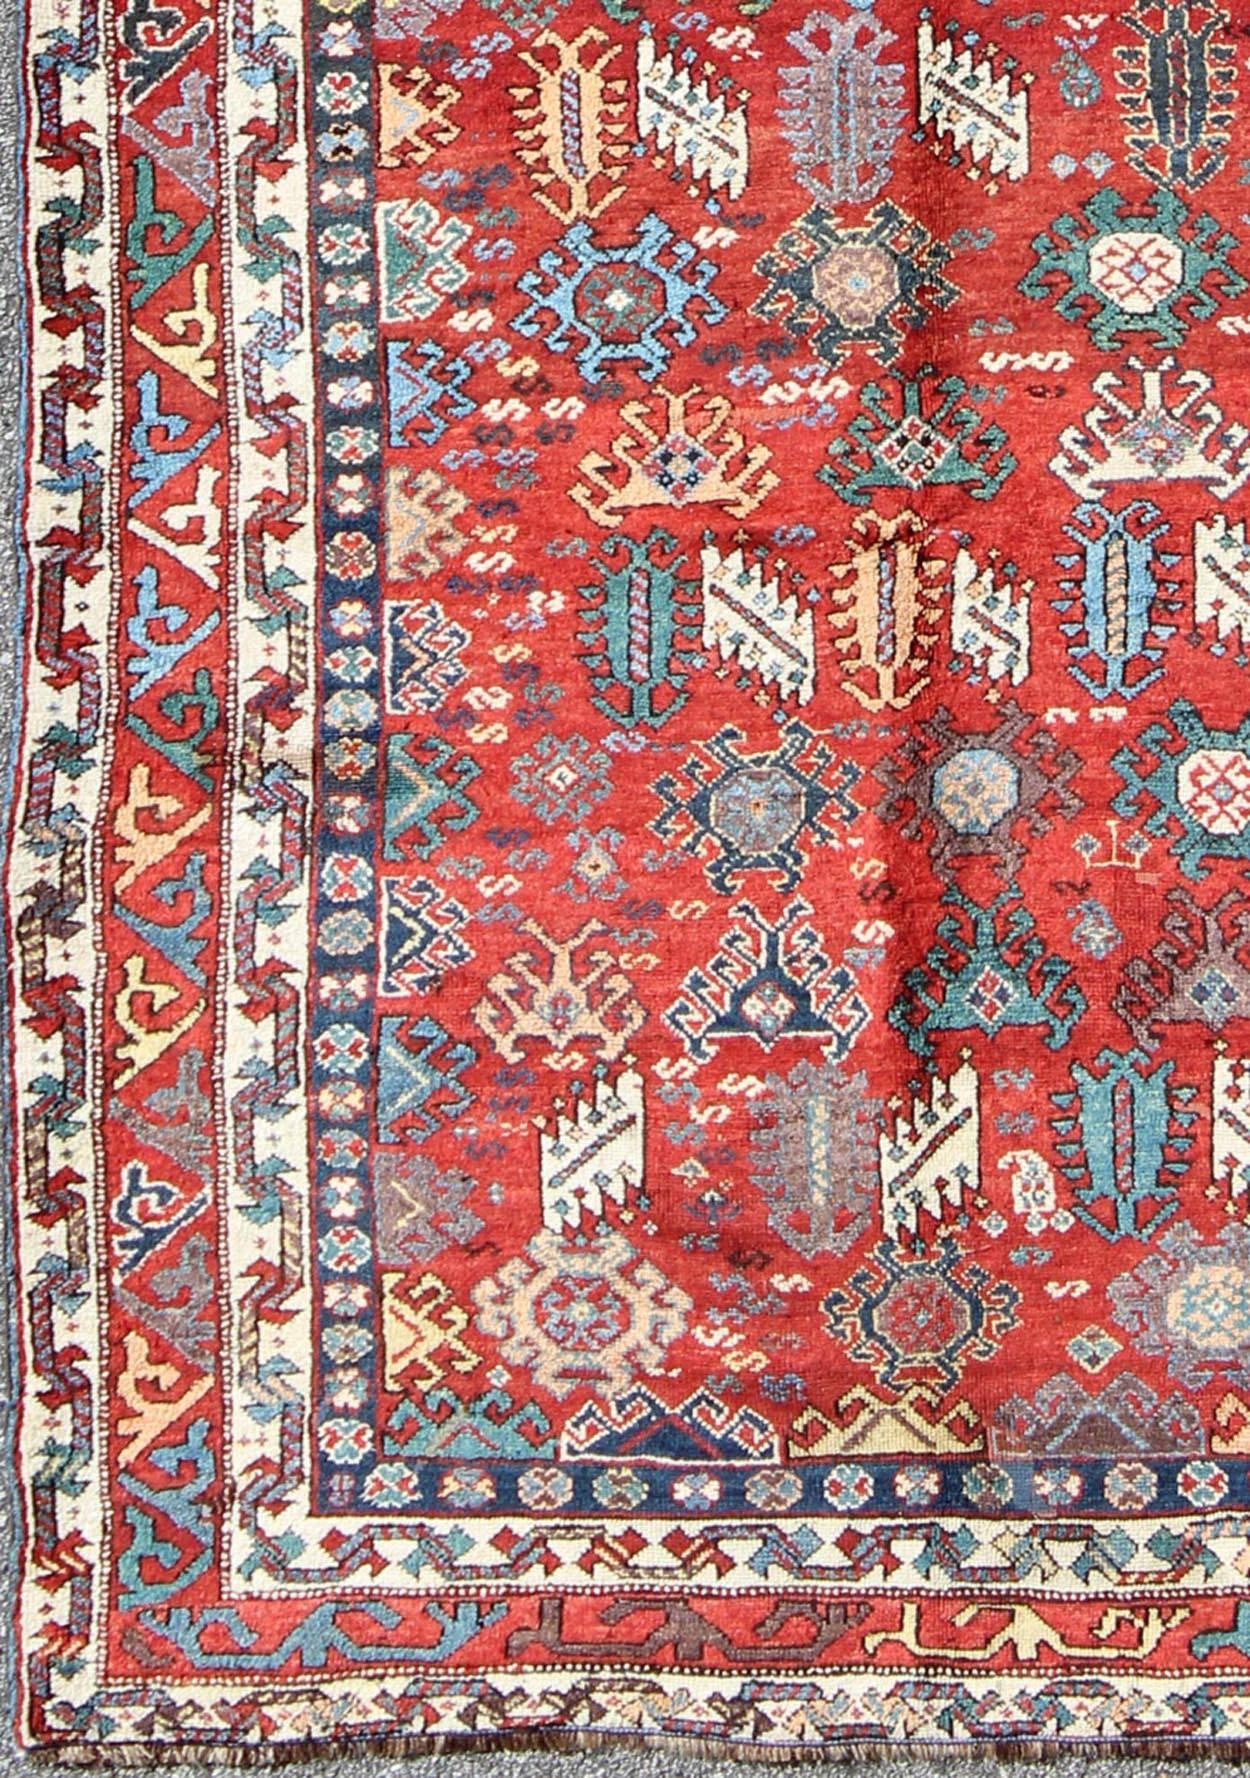 Antique Qashqai Persian rug with all-over sub-geometric design and tiered border, rug e-0508, country of origin / type: Iran / Qashqai, circa 1910

The Qashgai nomads are found in the Fars province in southwest Iran. They move twice a year, between